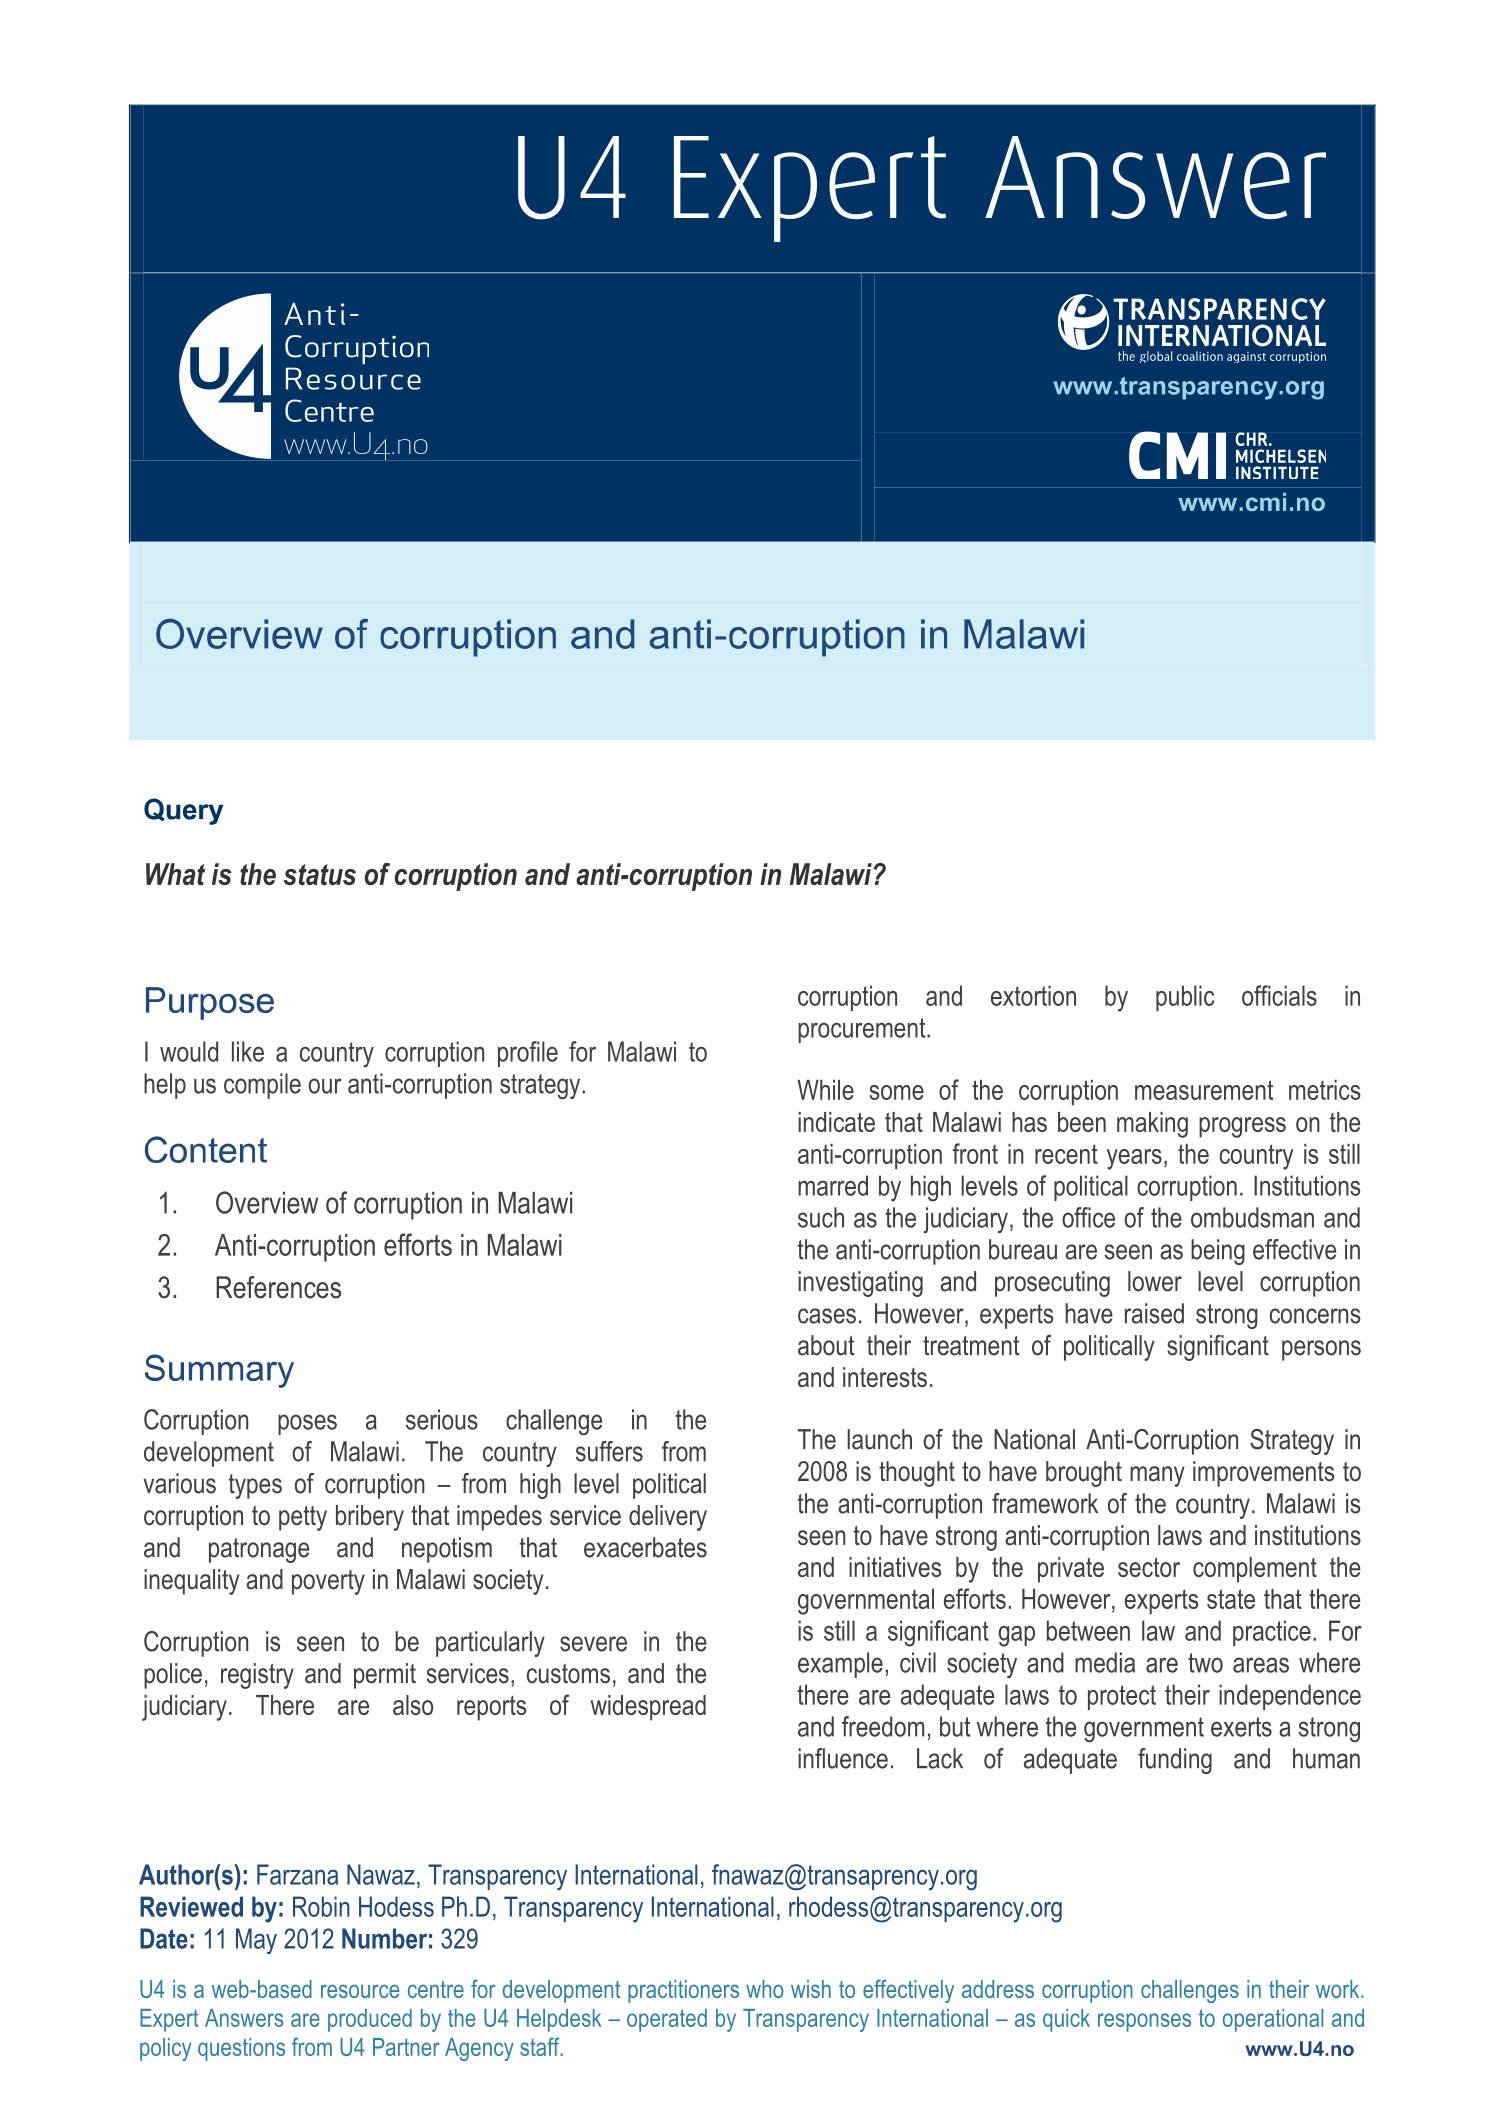 Overview of corruption and anti-corruption in Malawi